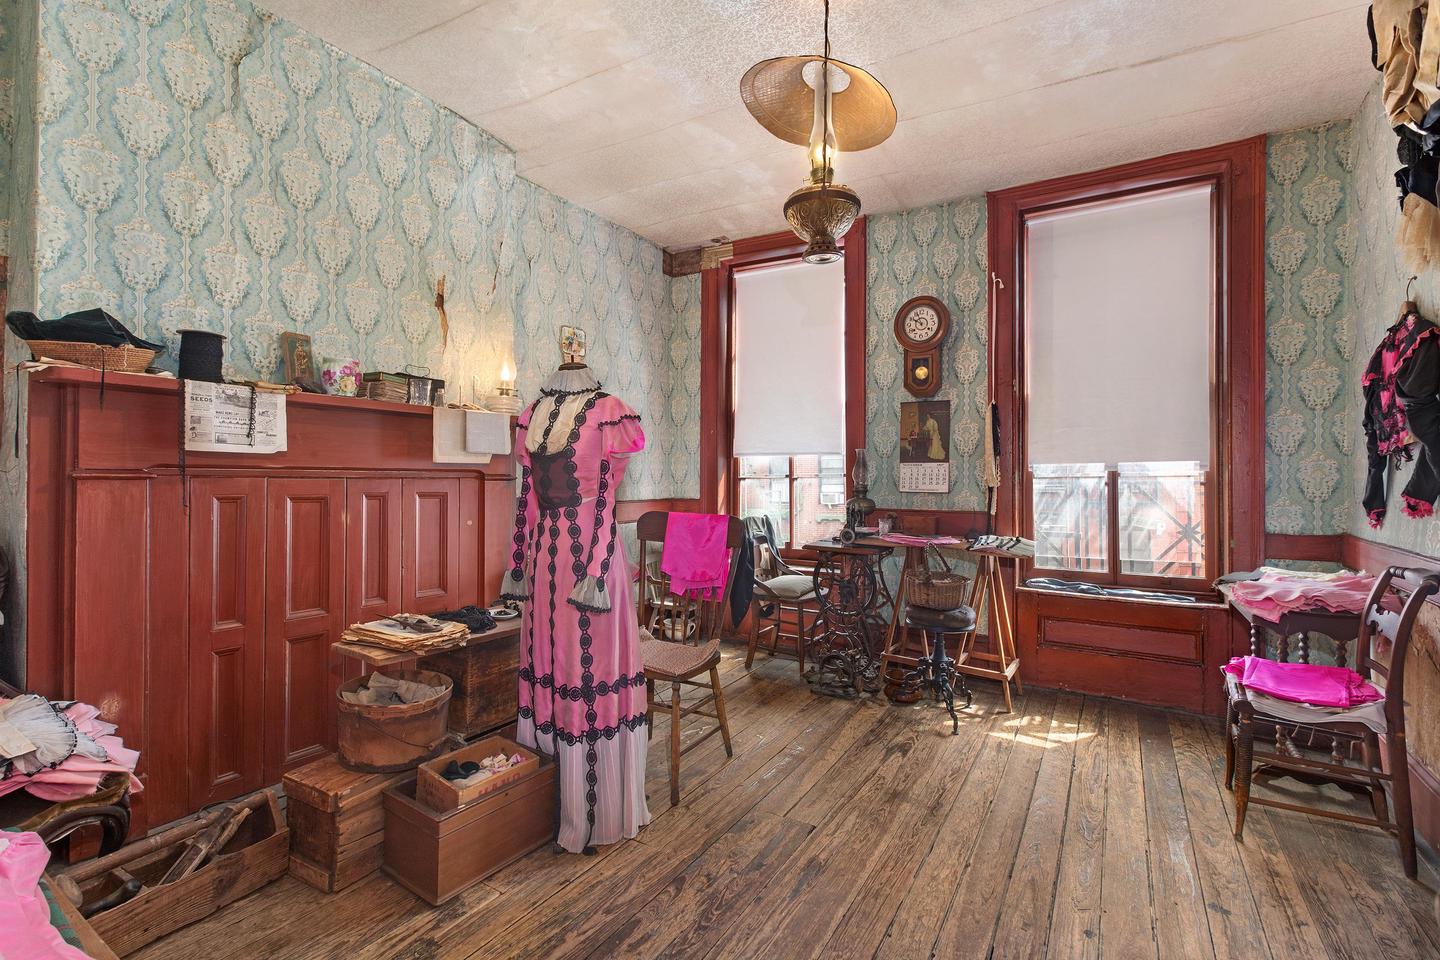 Preview photo of Lower East Side Tenement Museum National Historic Site